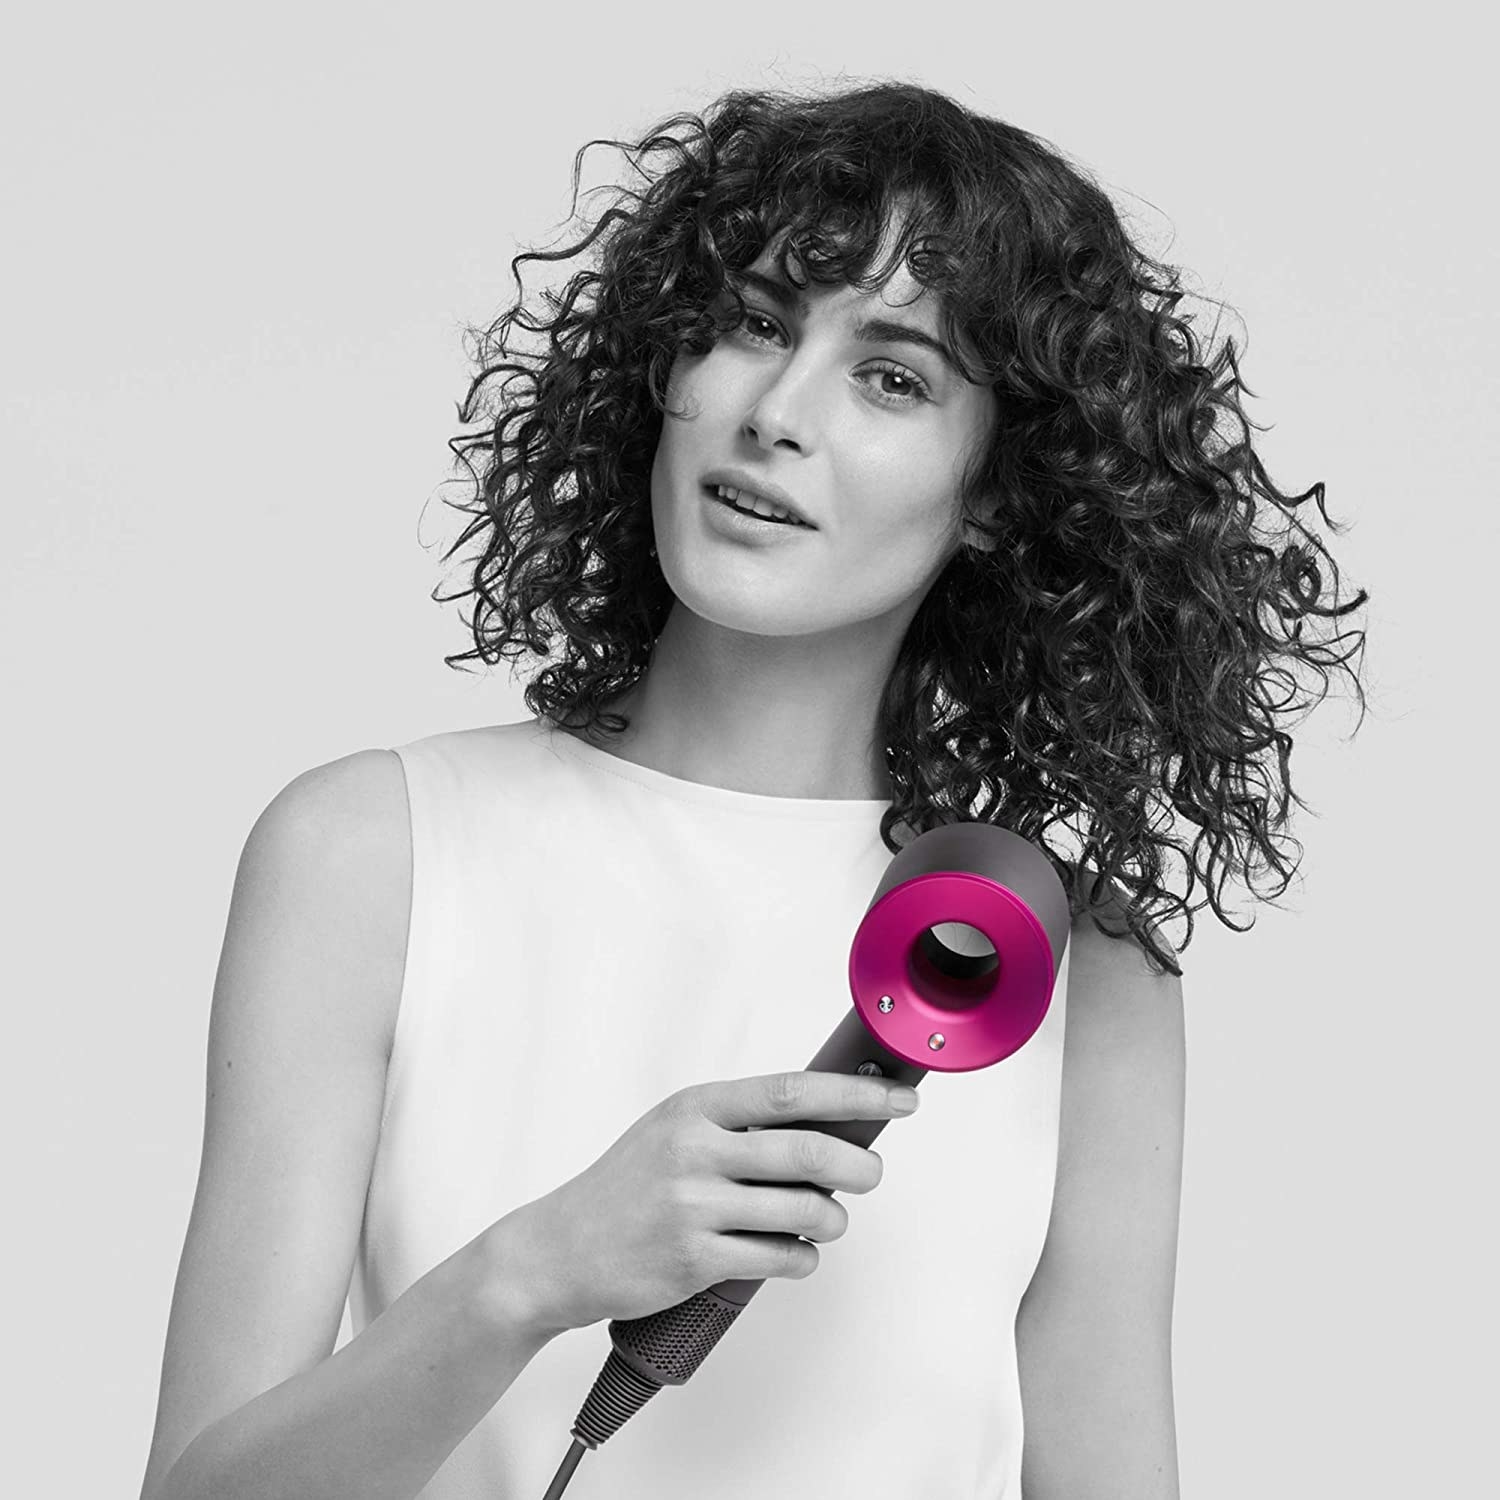 An image of a curly haired woman using dyson hair dryer on her hair